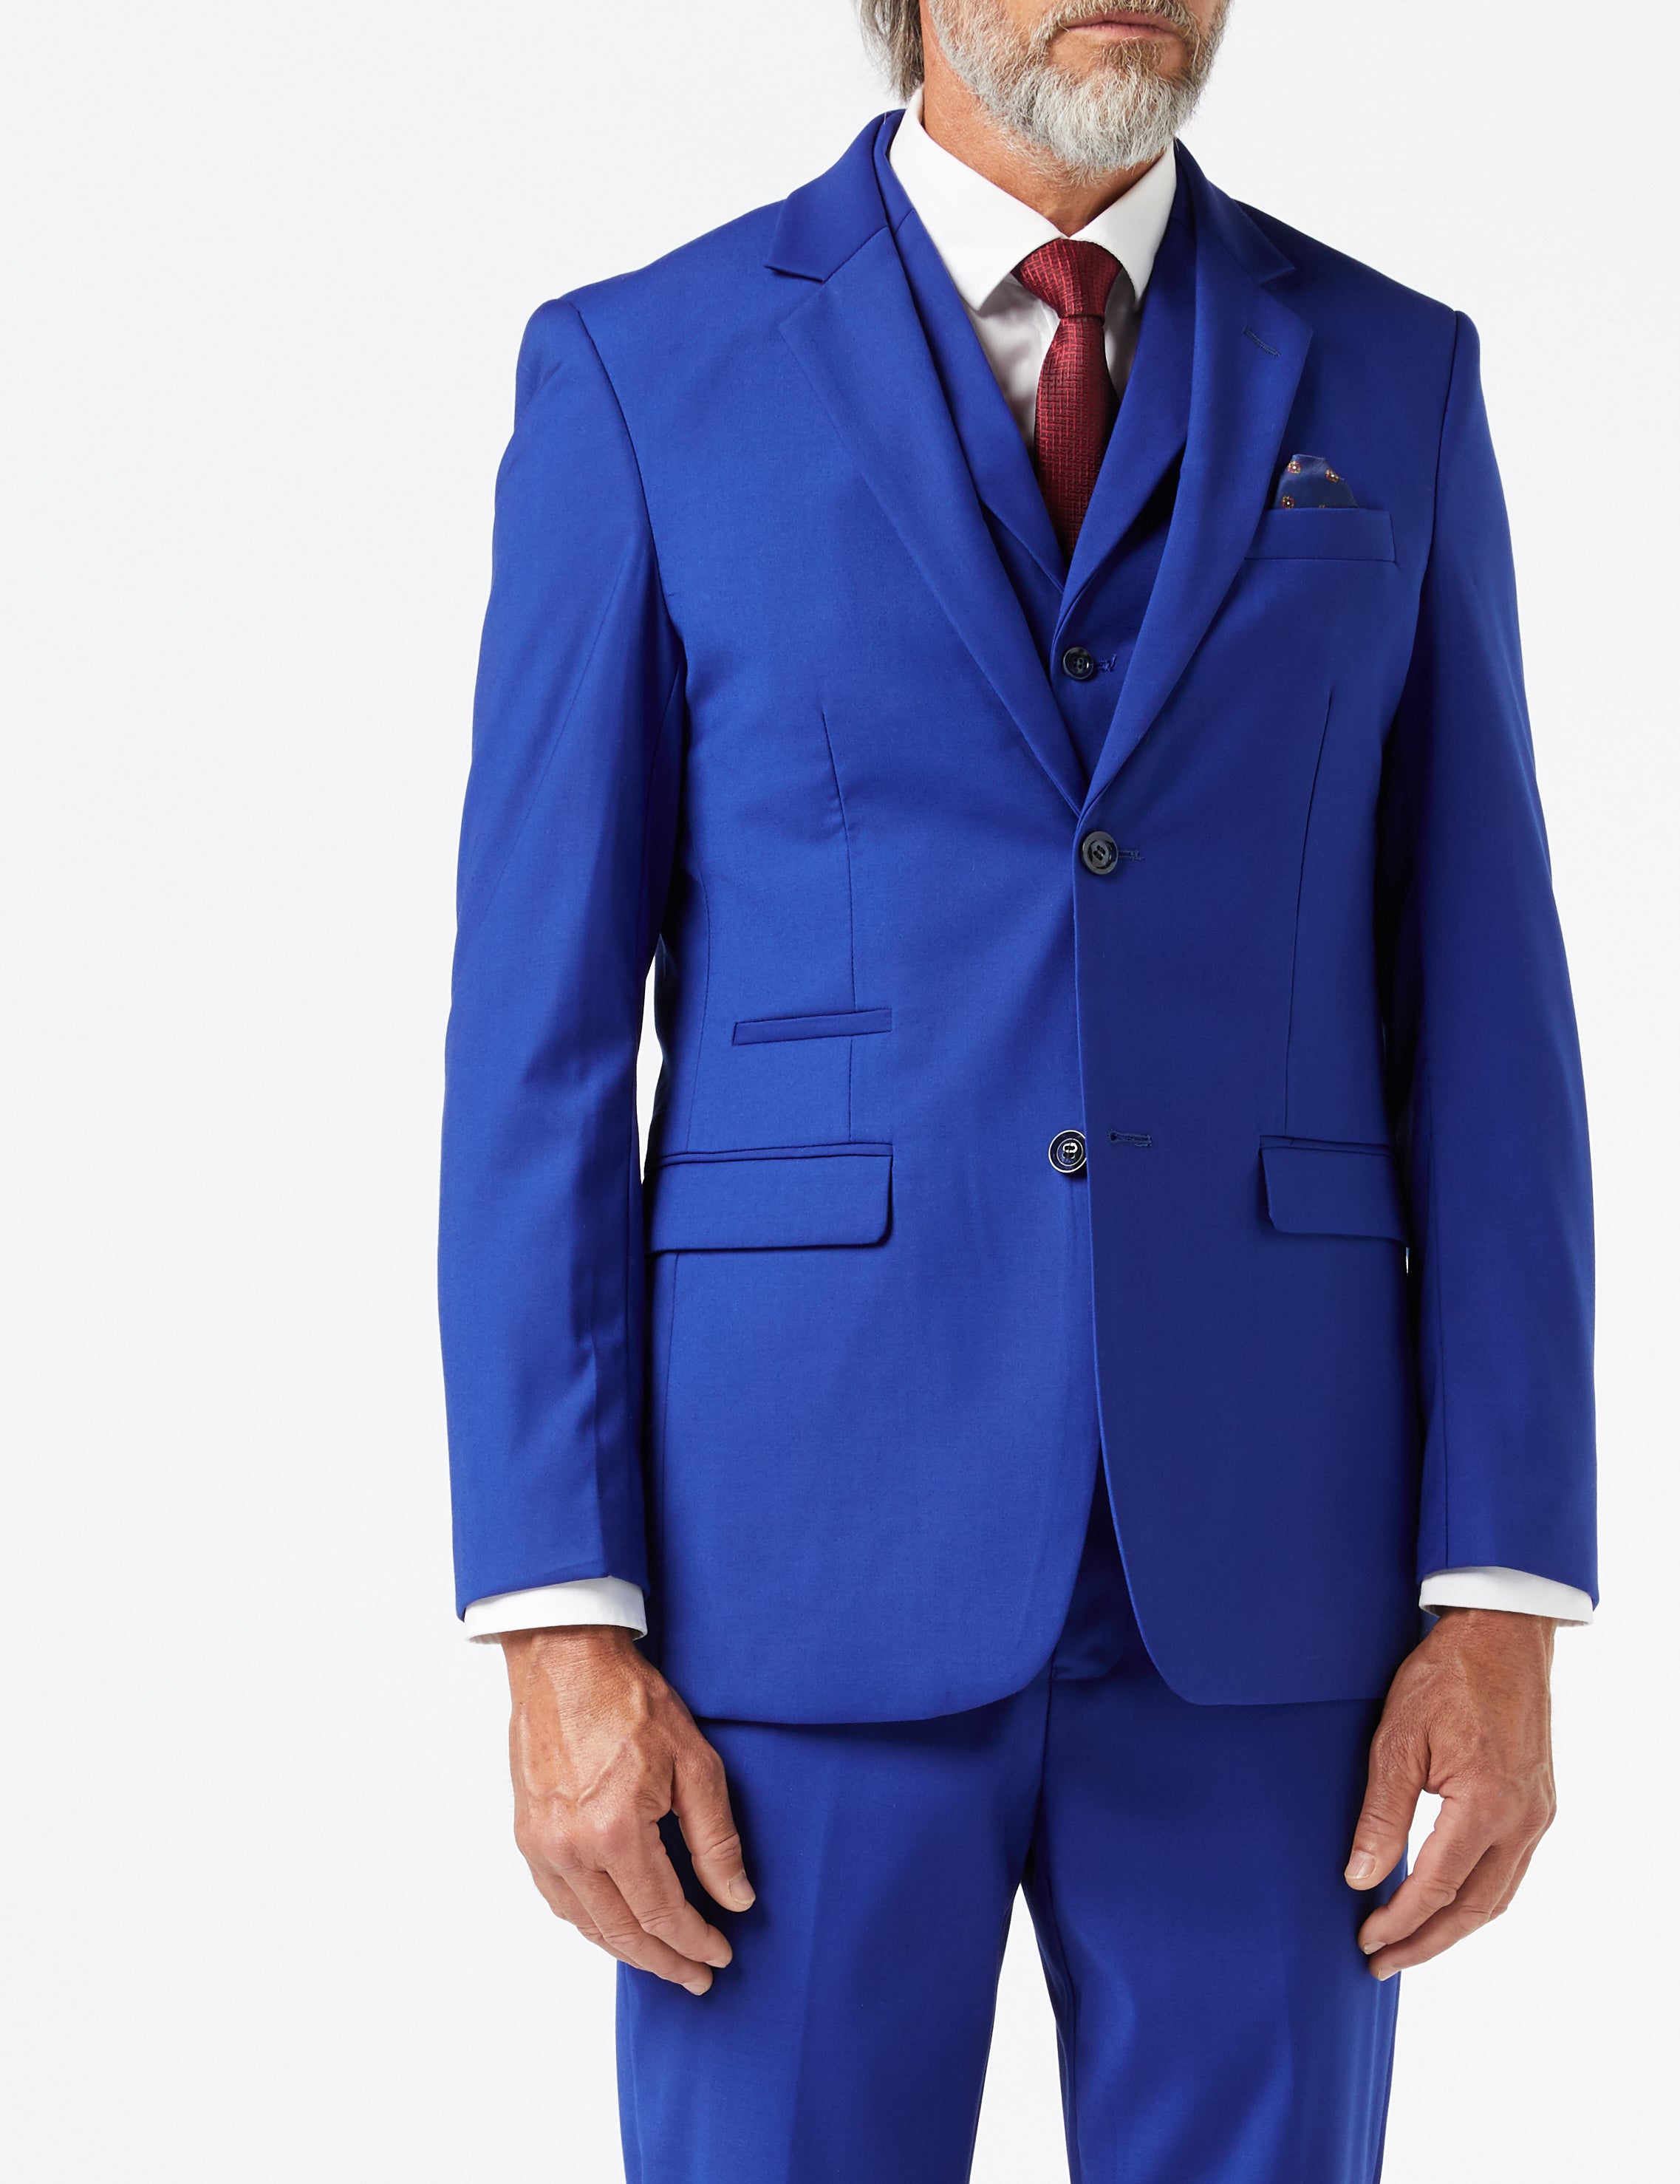 Blue Wedding Suits for the Groom and Guests | XPOSED London